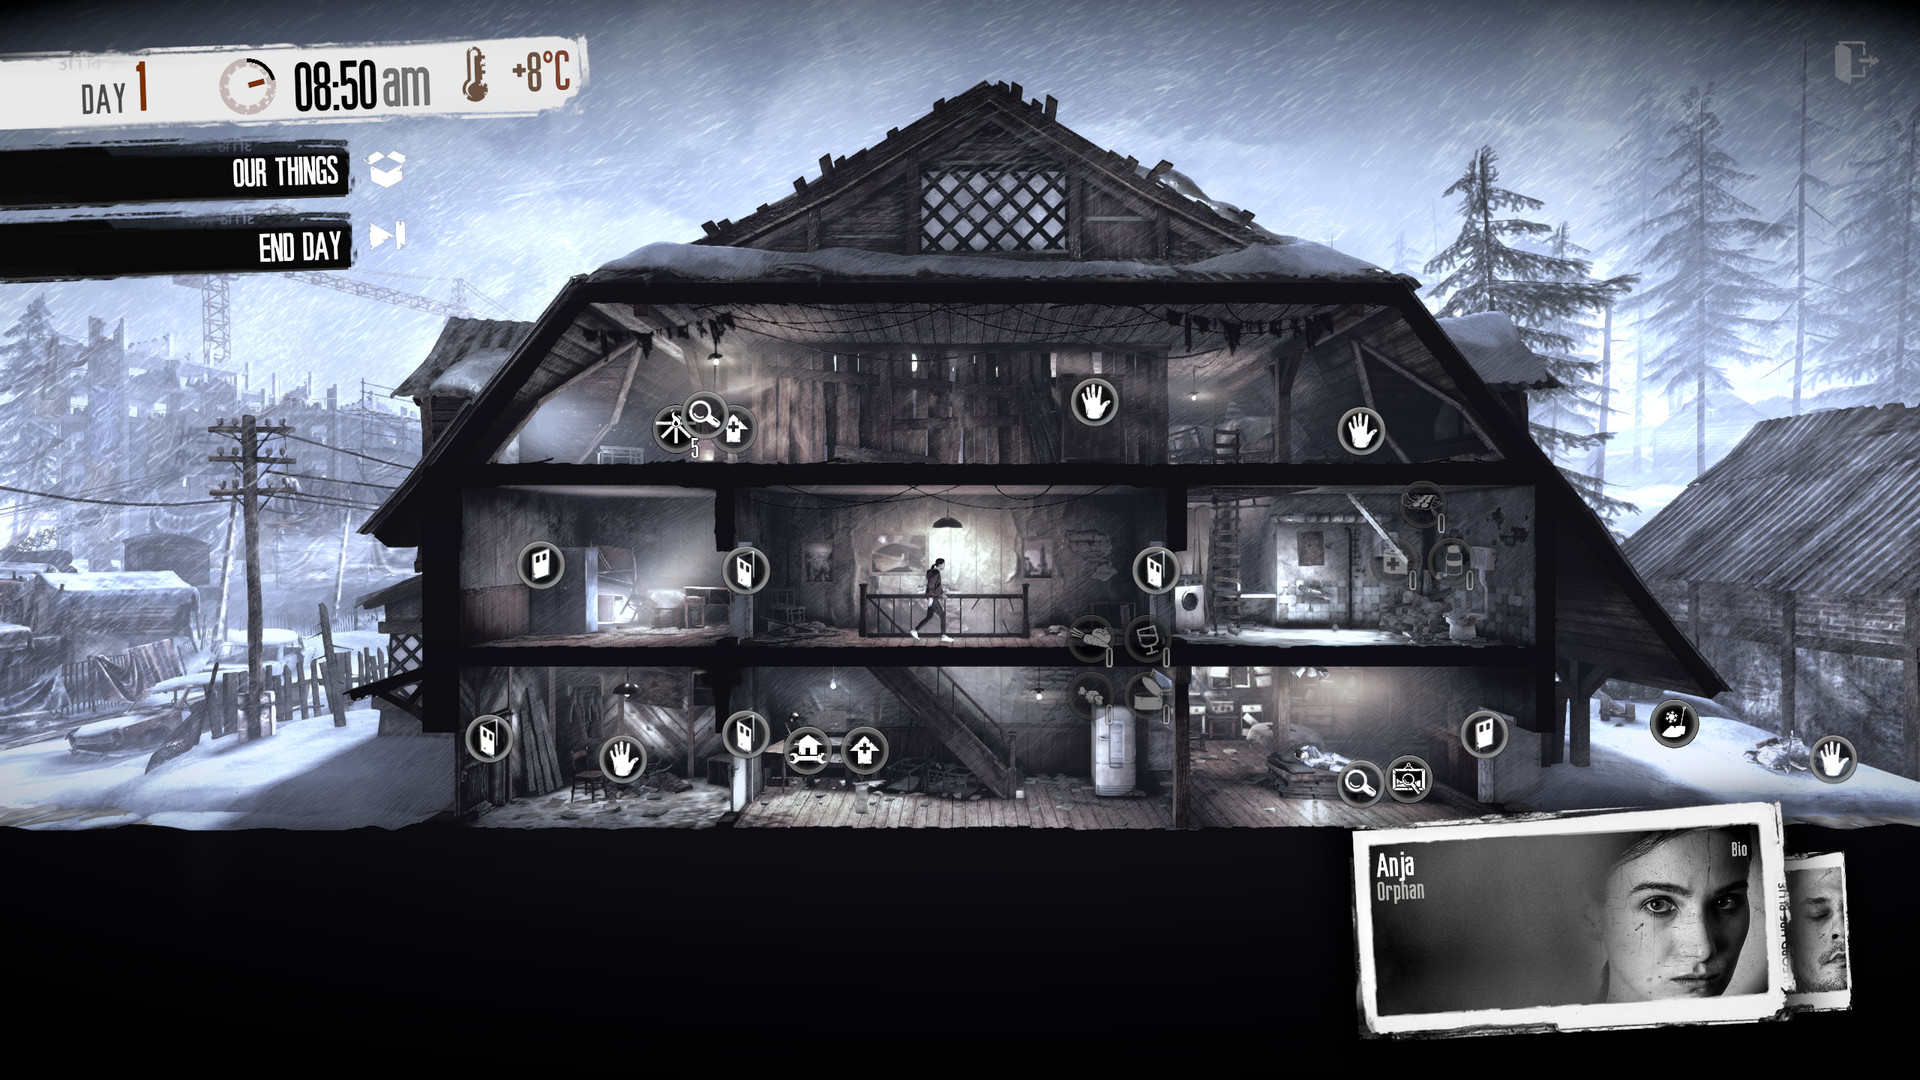 Find the best laptops for This War of Mine